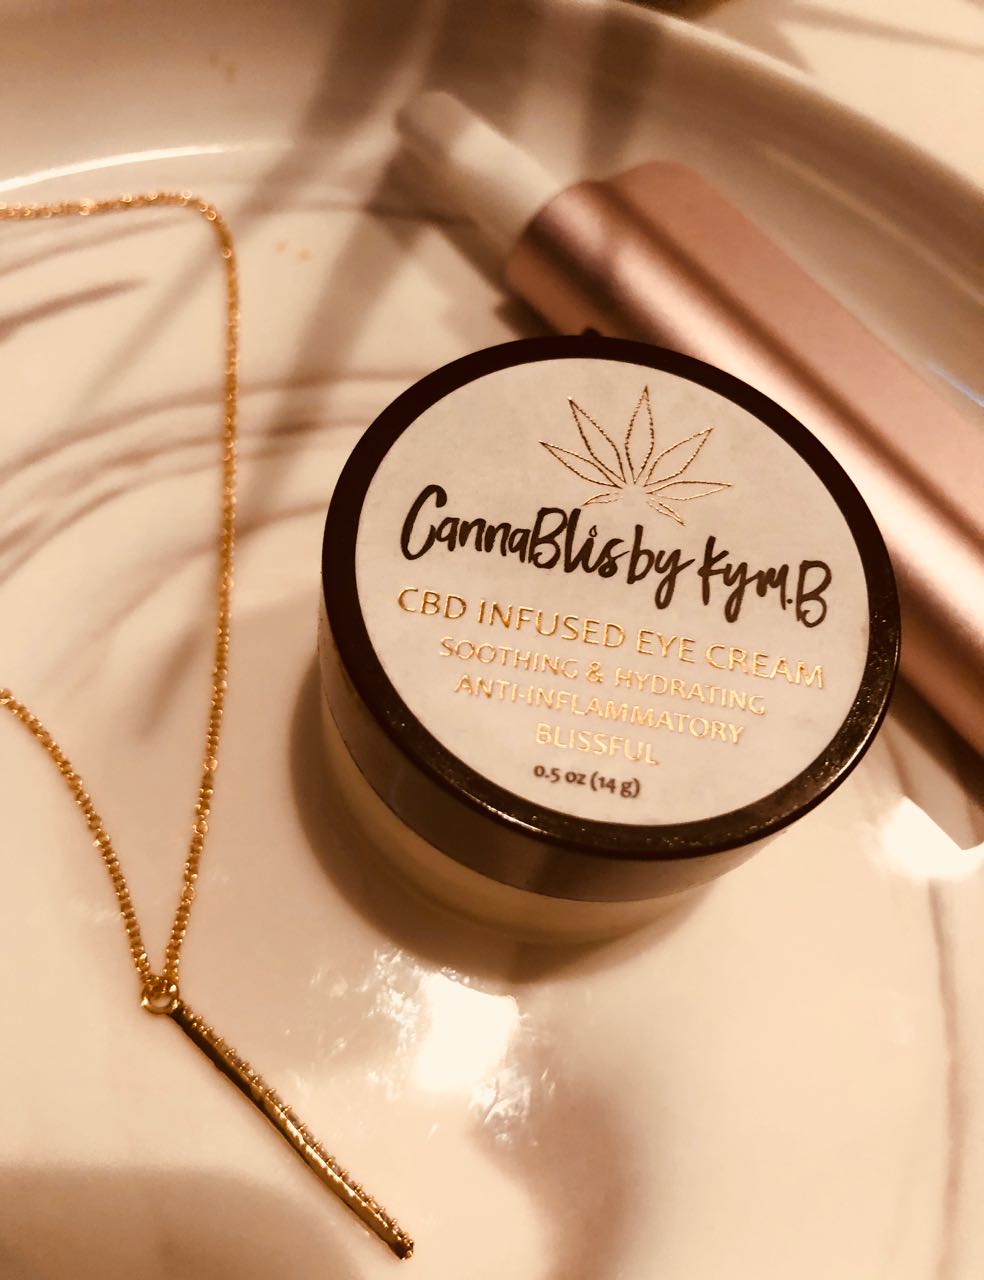 Why These CBD Products Are Good For The Skin